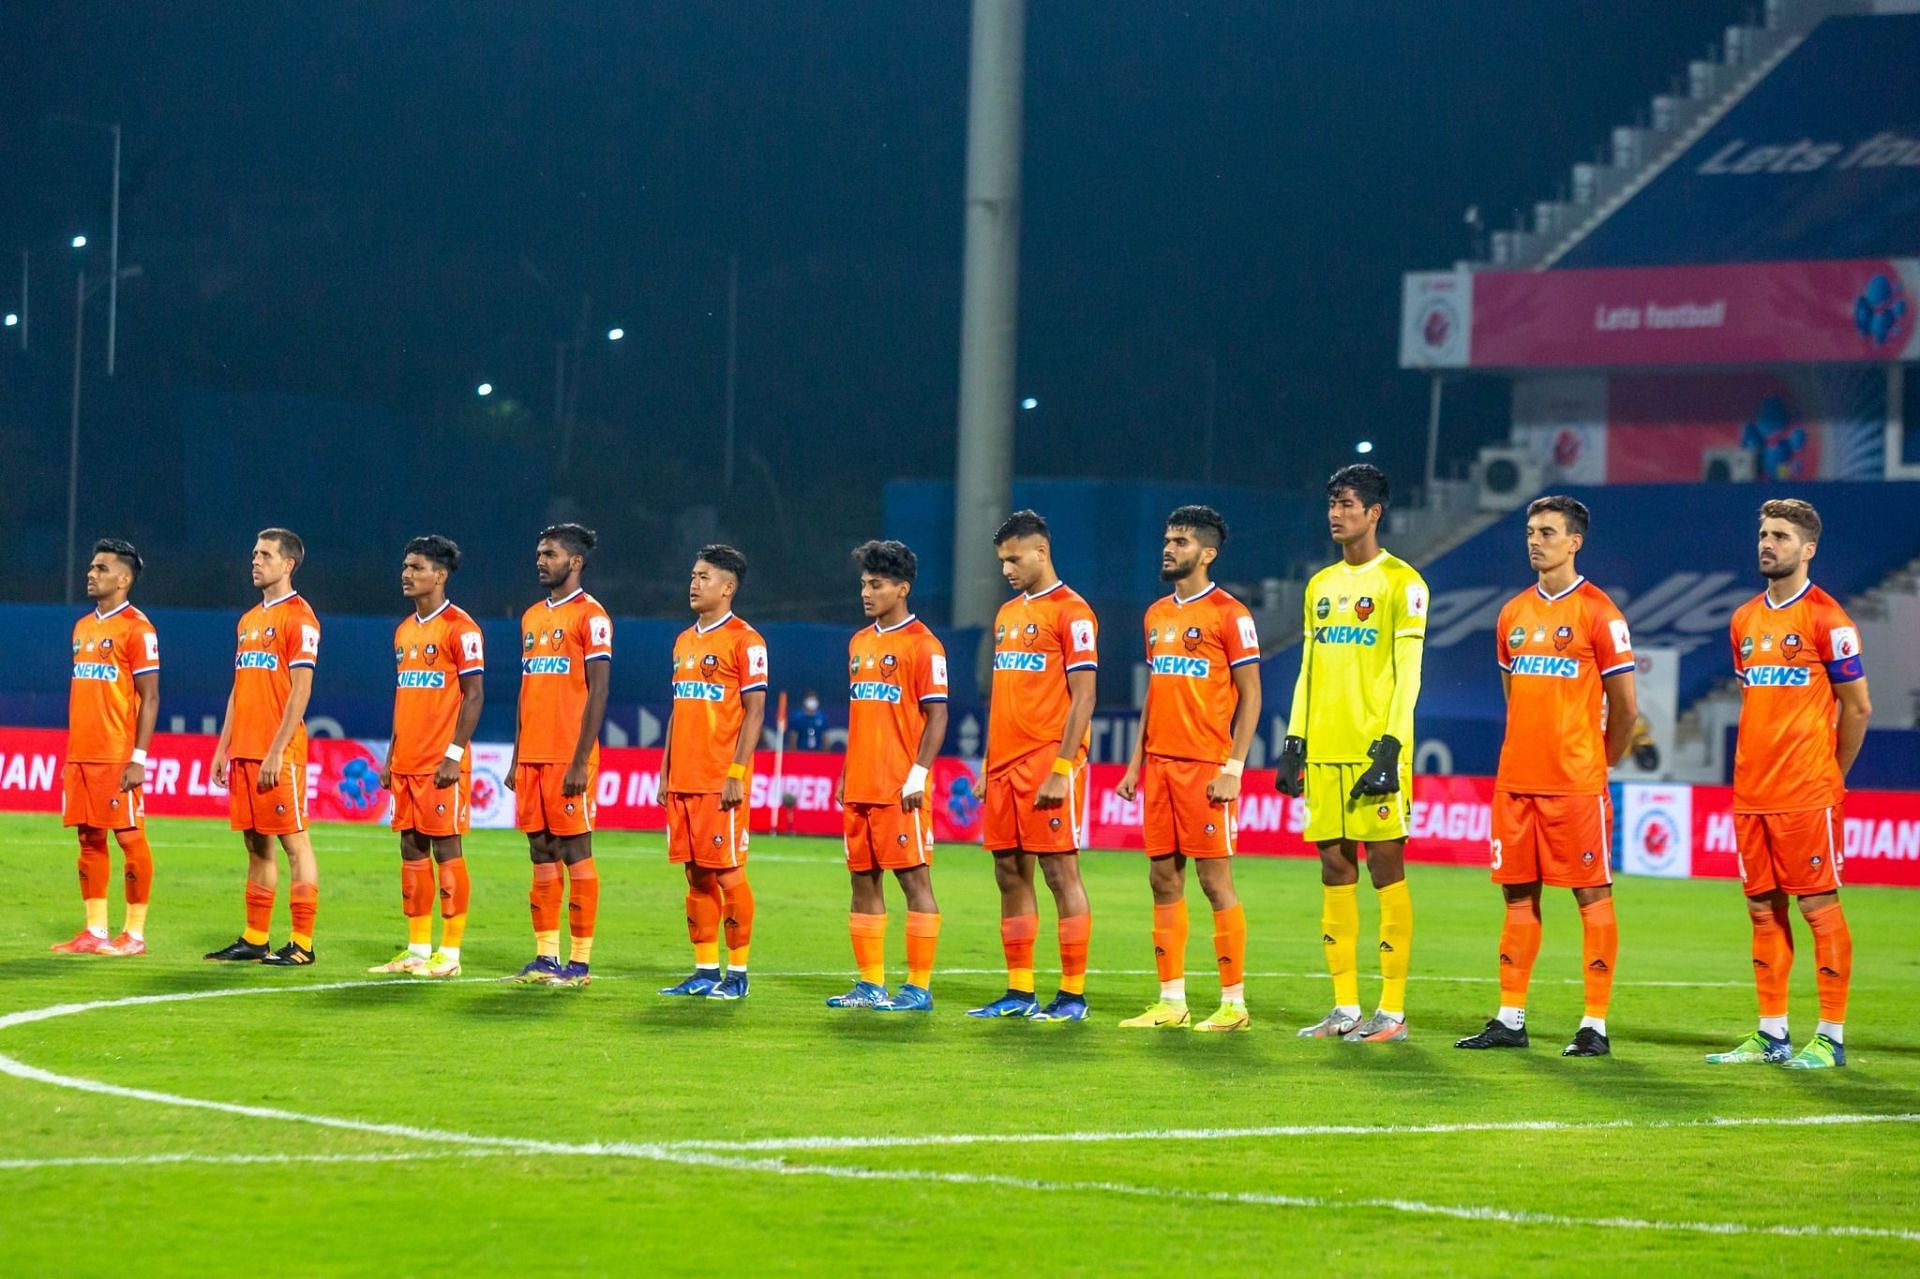 ISL teams like FC Goa pay a lot of attention to market research, says Mr. Joseph Eapen. Image credit: FC Goa Facebook